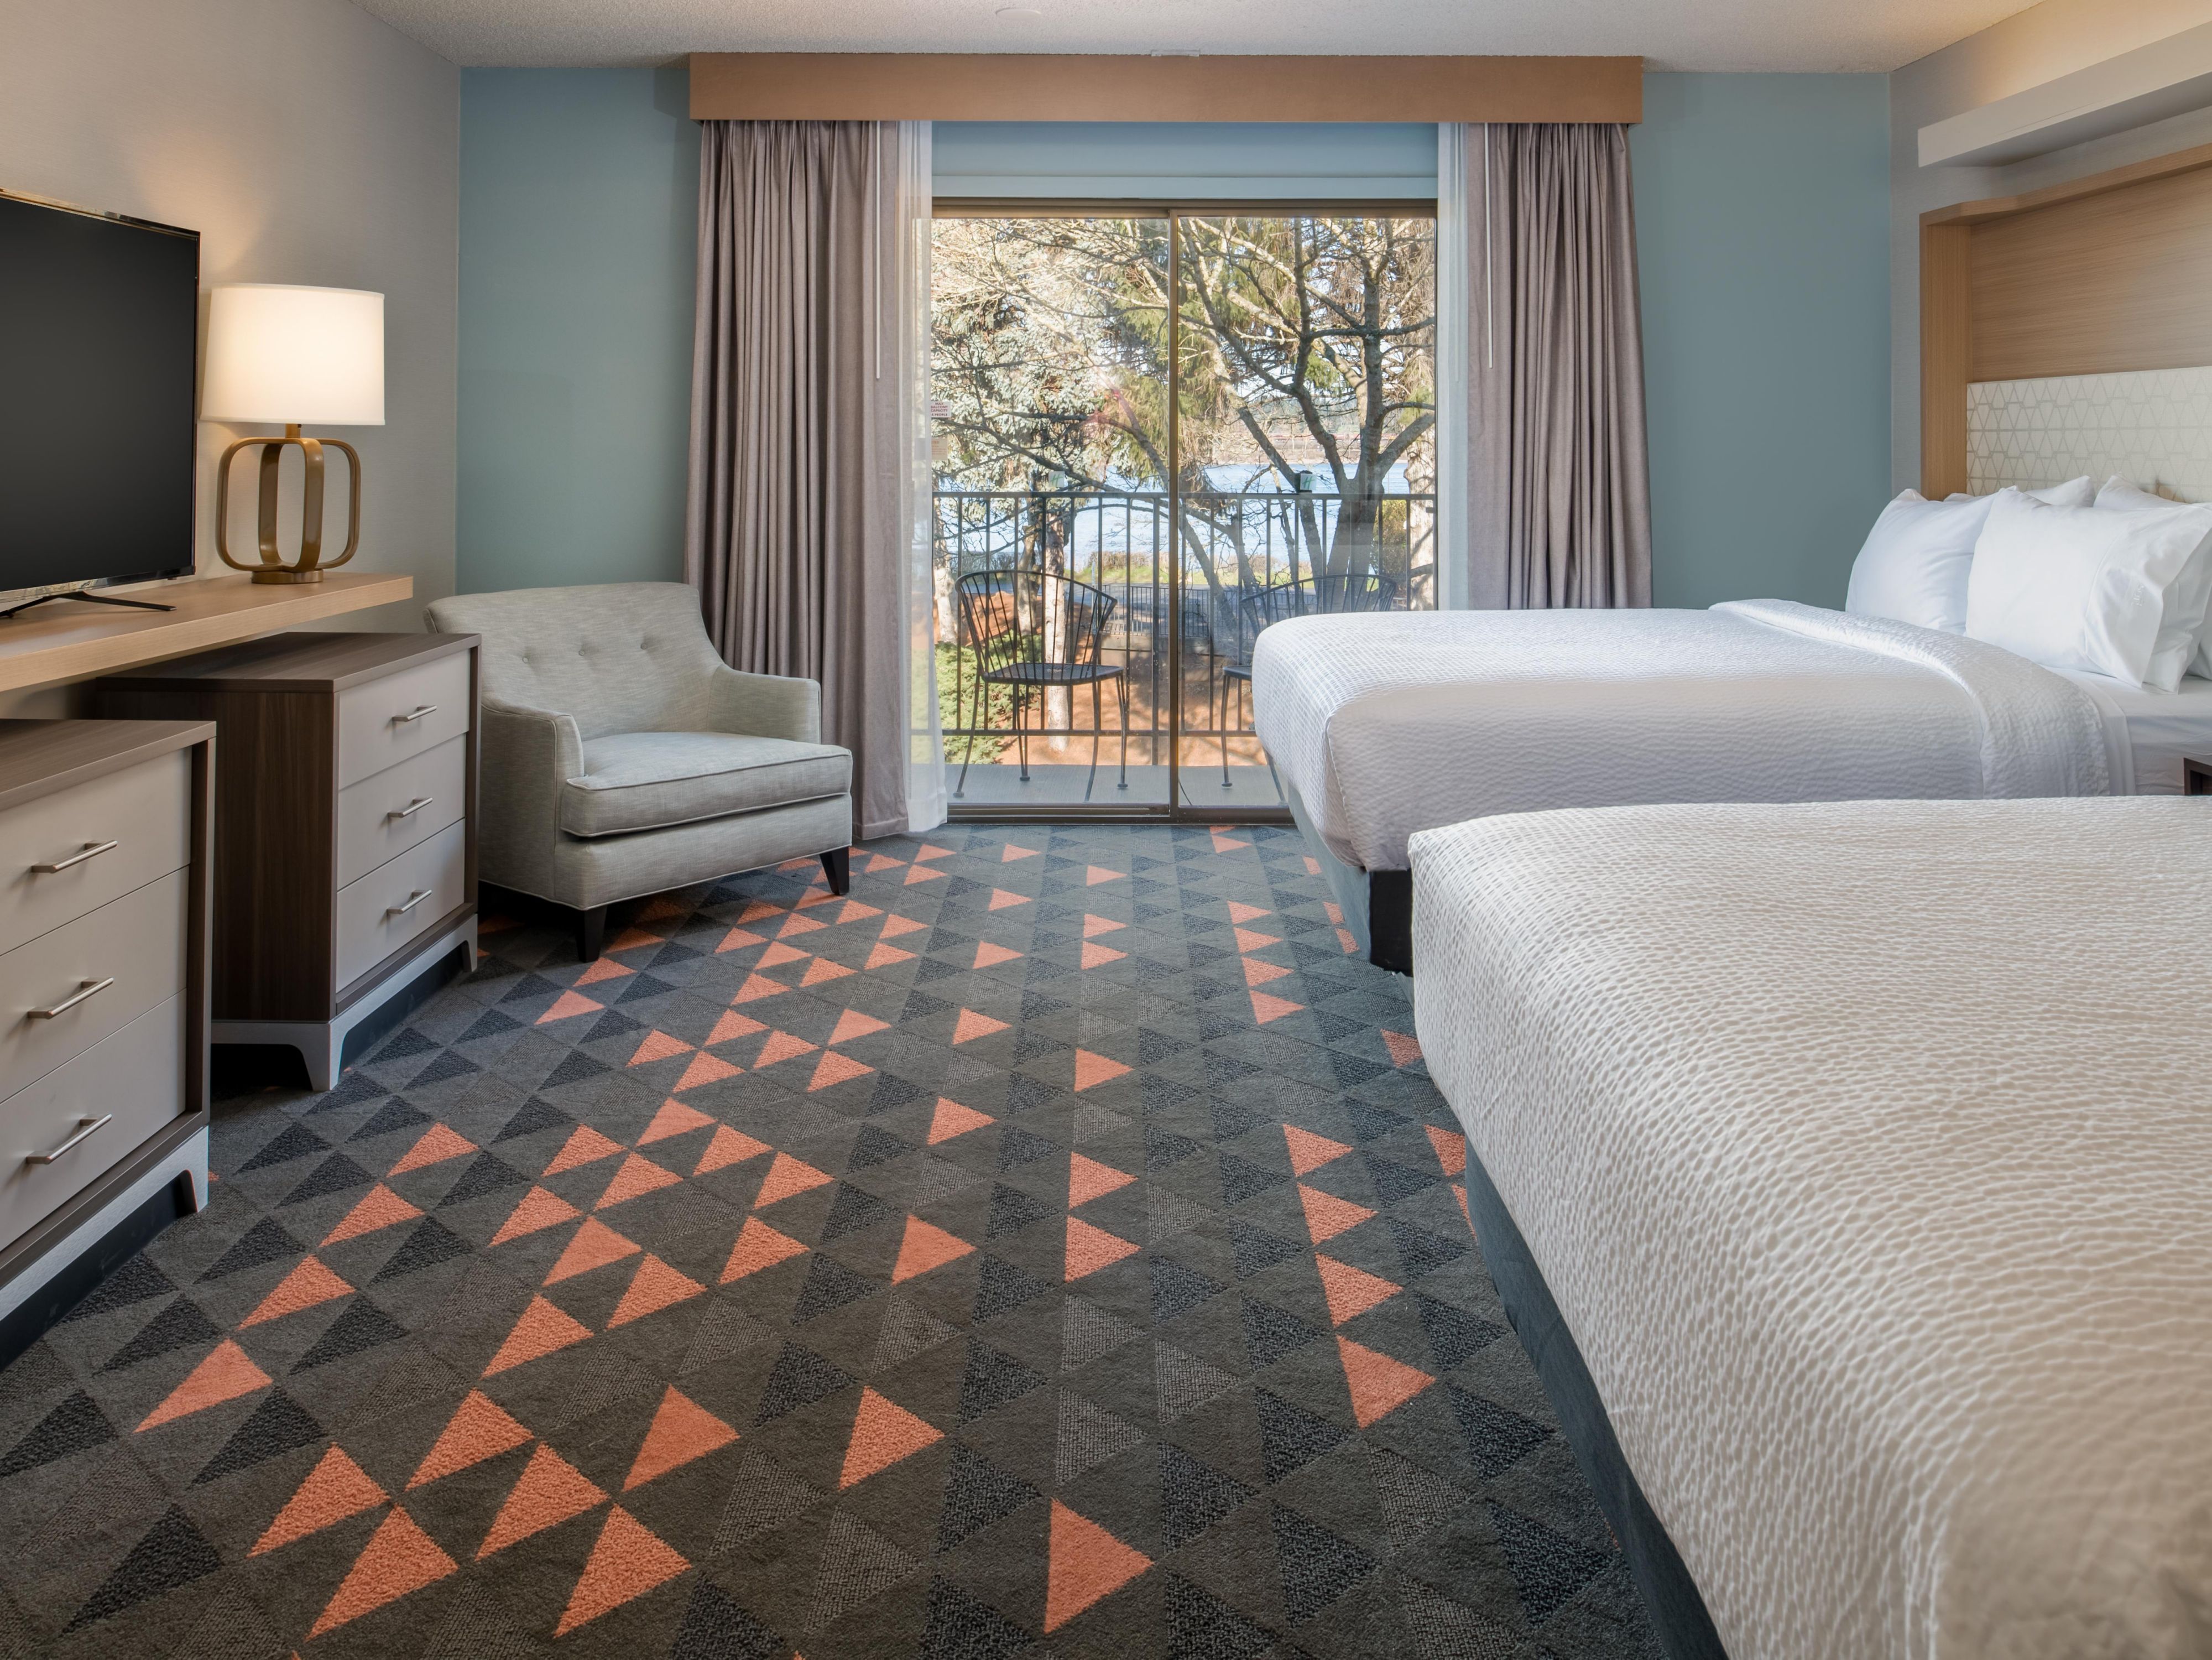 Relax in our newly updated guest rooms and suites with private balconies giving you a front-row seat to the beauty of the Pacific Northwest. Enjoy beautiful river views and modern amenities, including free Wi-Fi, a fridge, a microwave, Keurig coffeemaker, HDTV, and productive workspace.